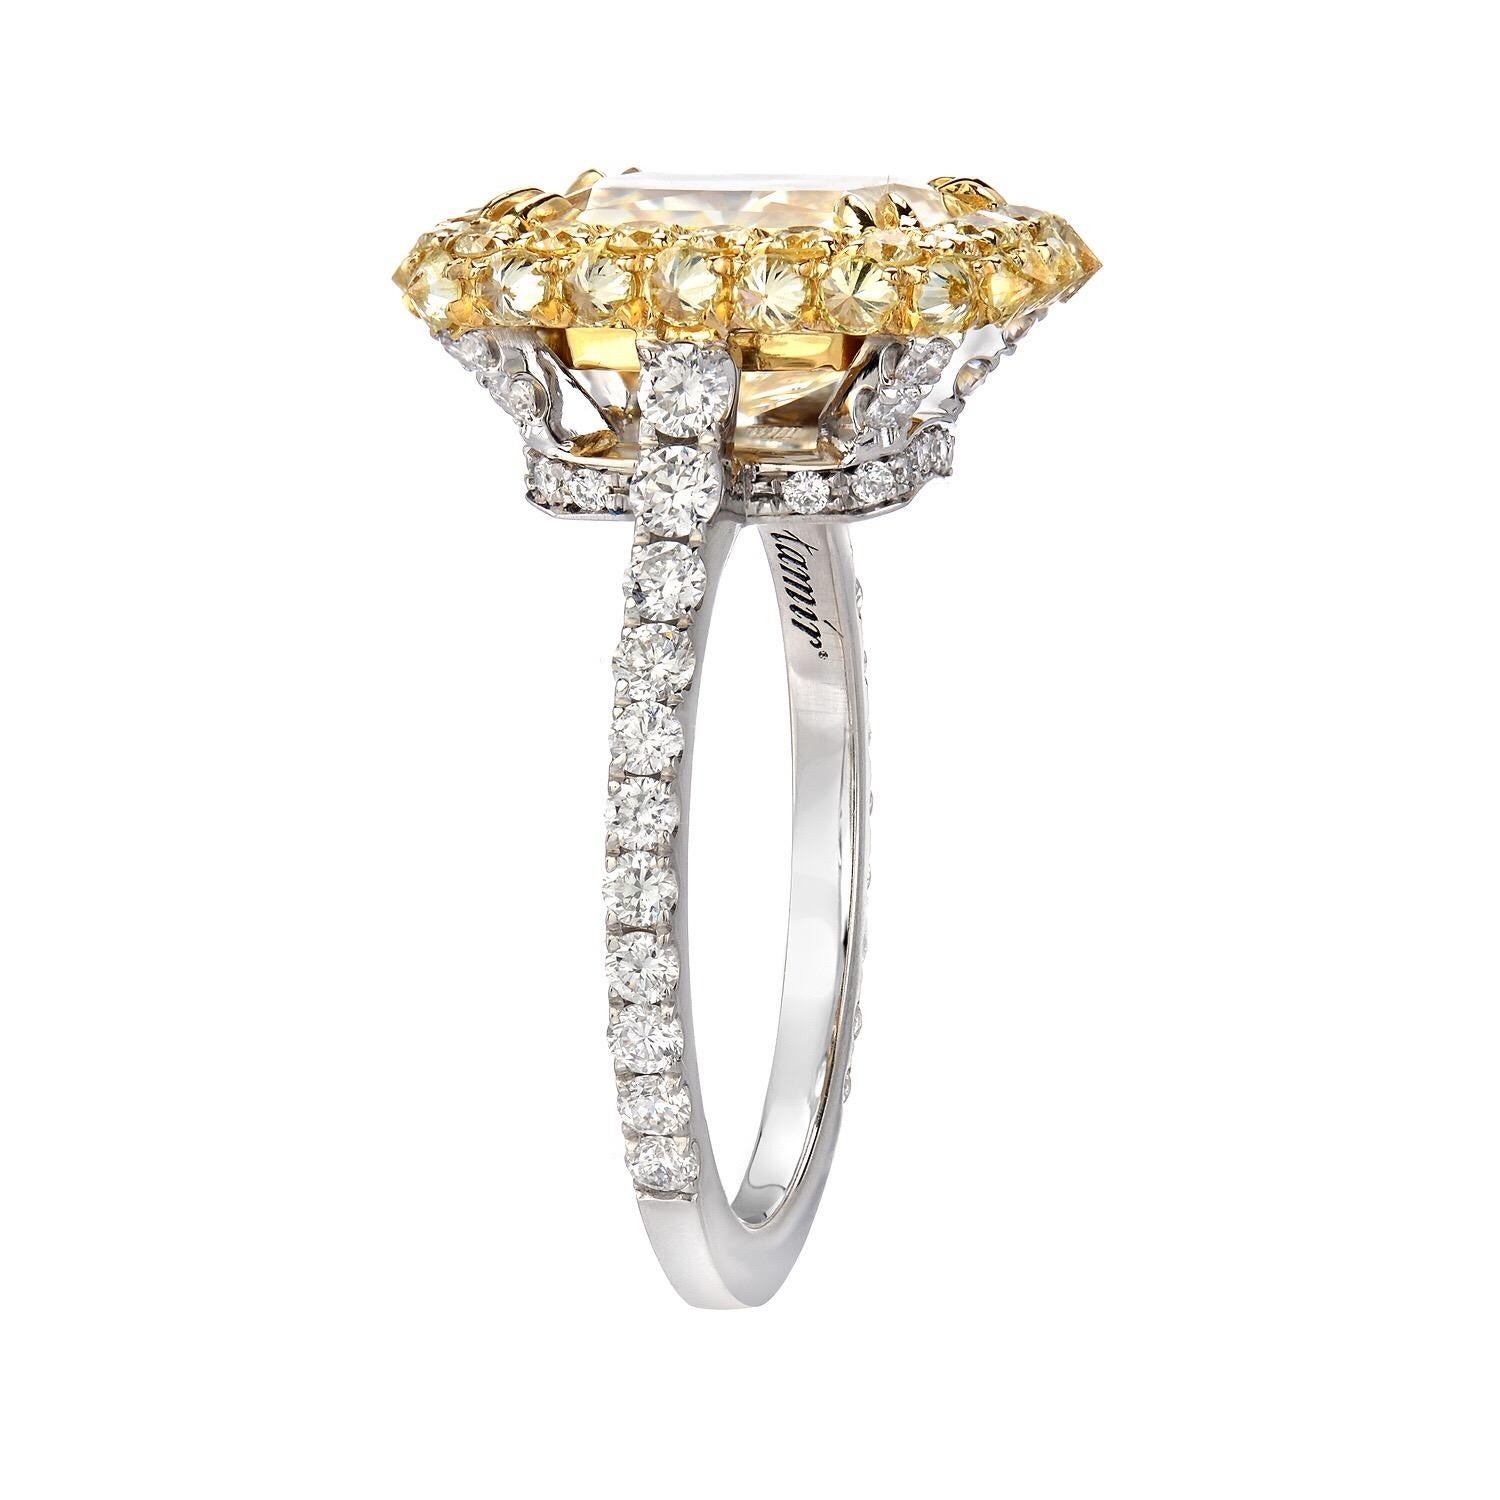 State of the art platinum and 18K yellow gold ring, centered by an exceptional 3.78 carat Fancy Light Yellow Diamond, VS2 clarity, surrounded by a total of 0.88 carat round brilliant yellow diamonds set inversely on the sides, and a total of 0.66